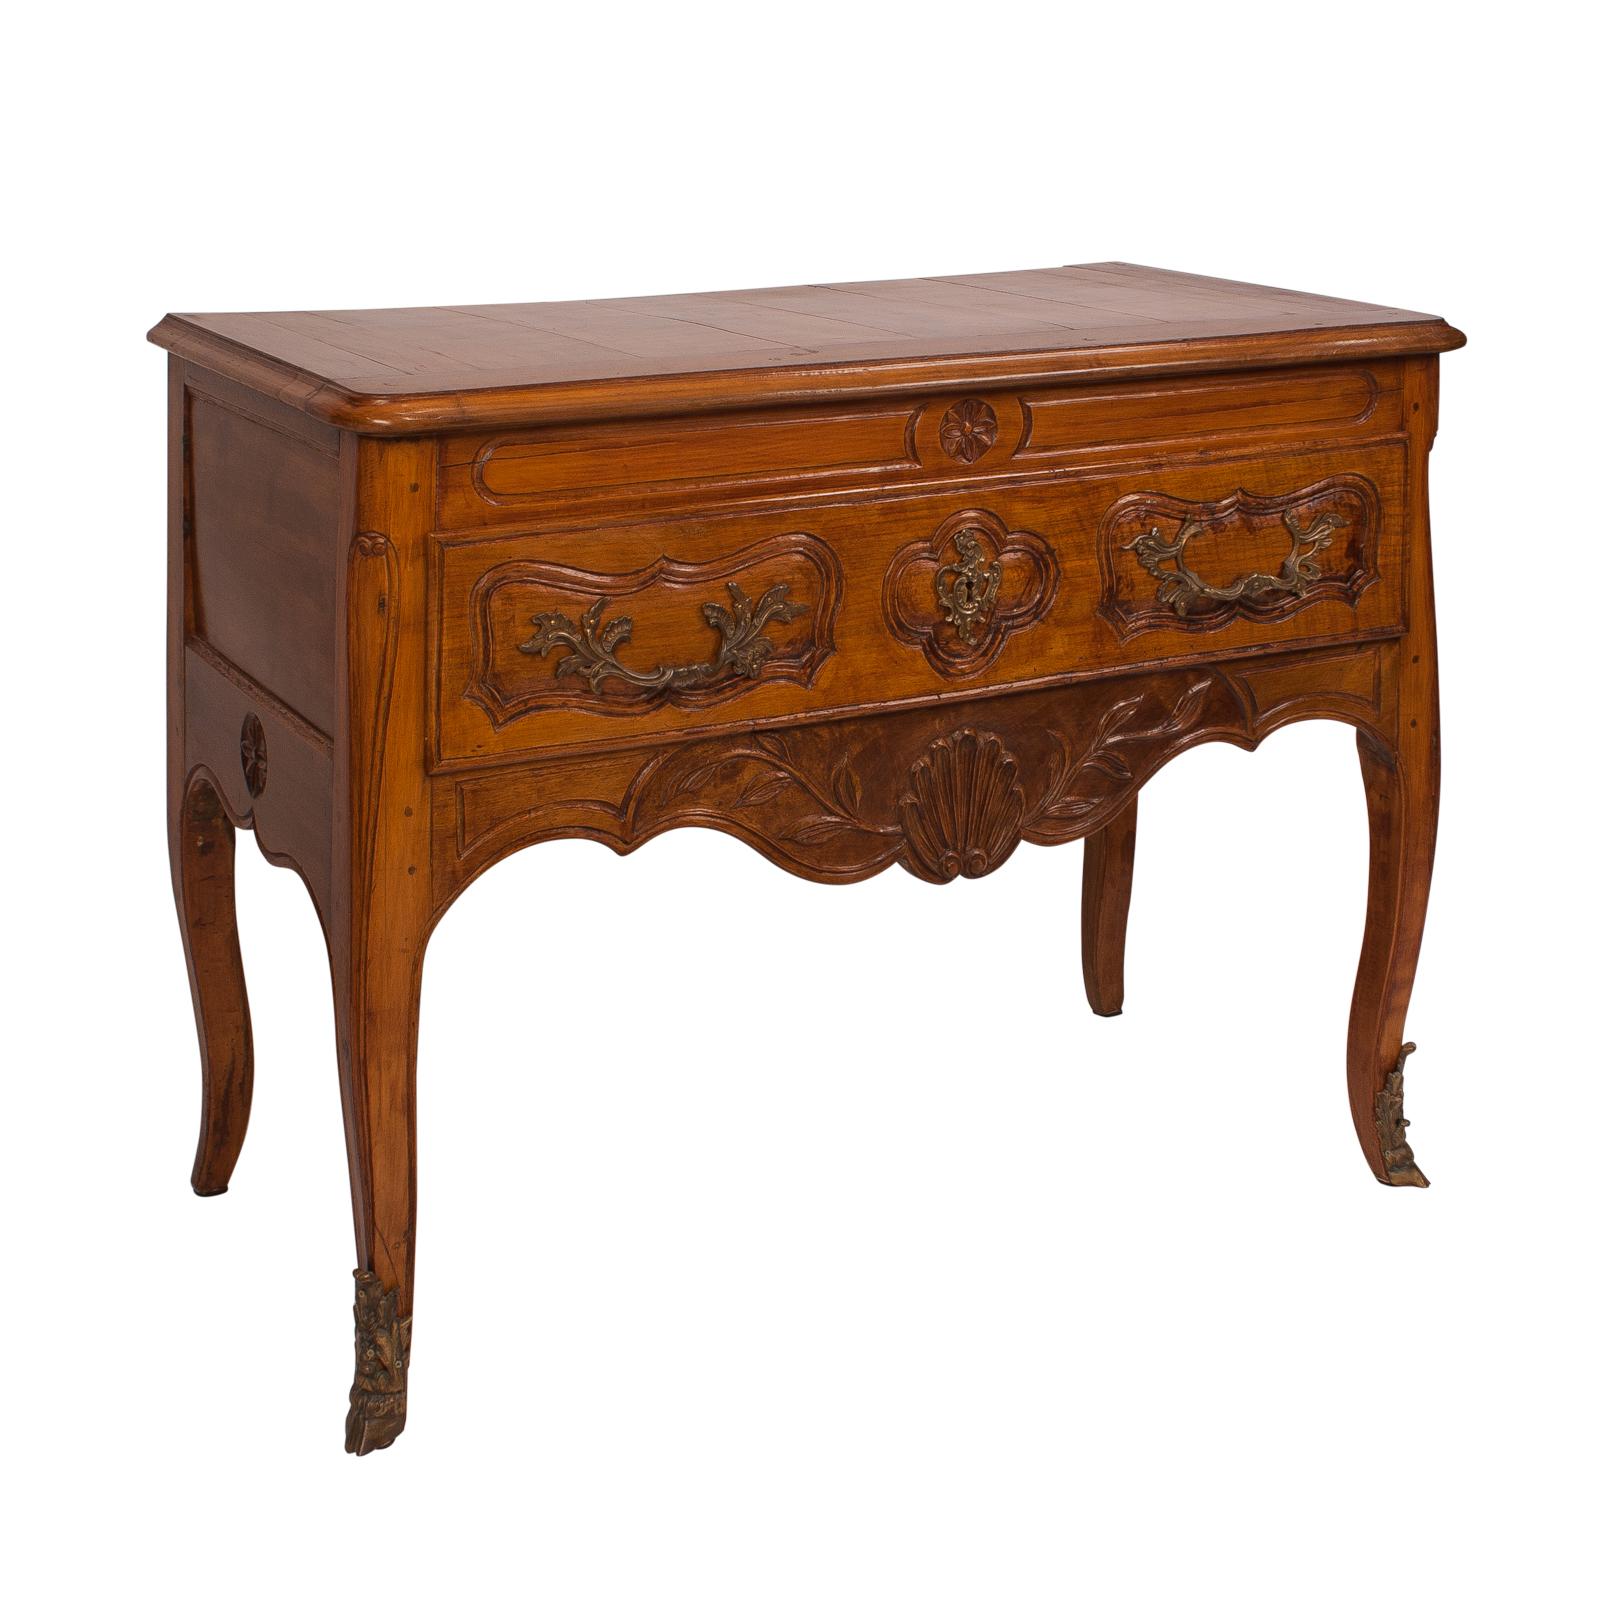 A 19th century Italian fruitwood one drawer table in the Louis XVI style, 19th century.